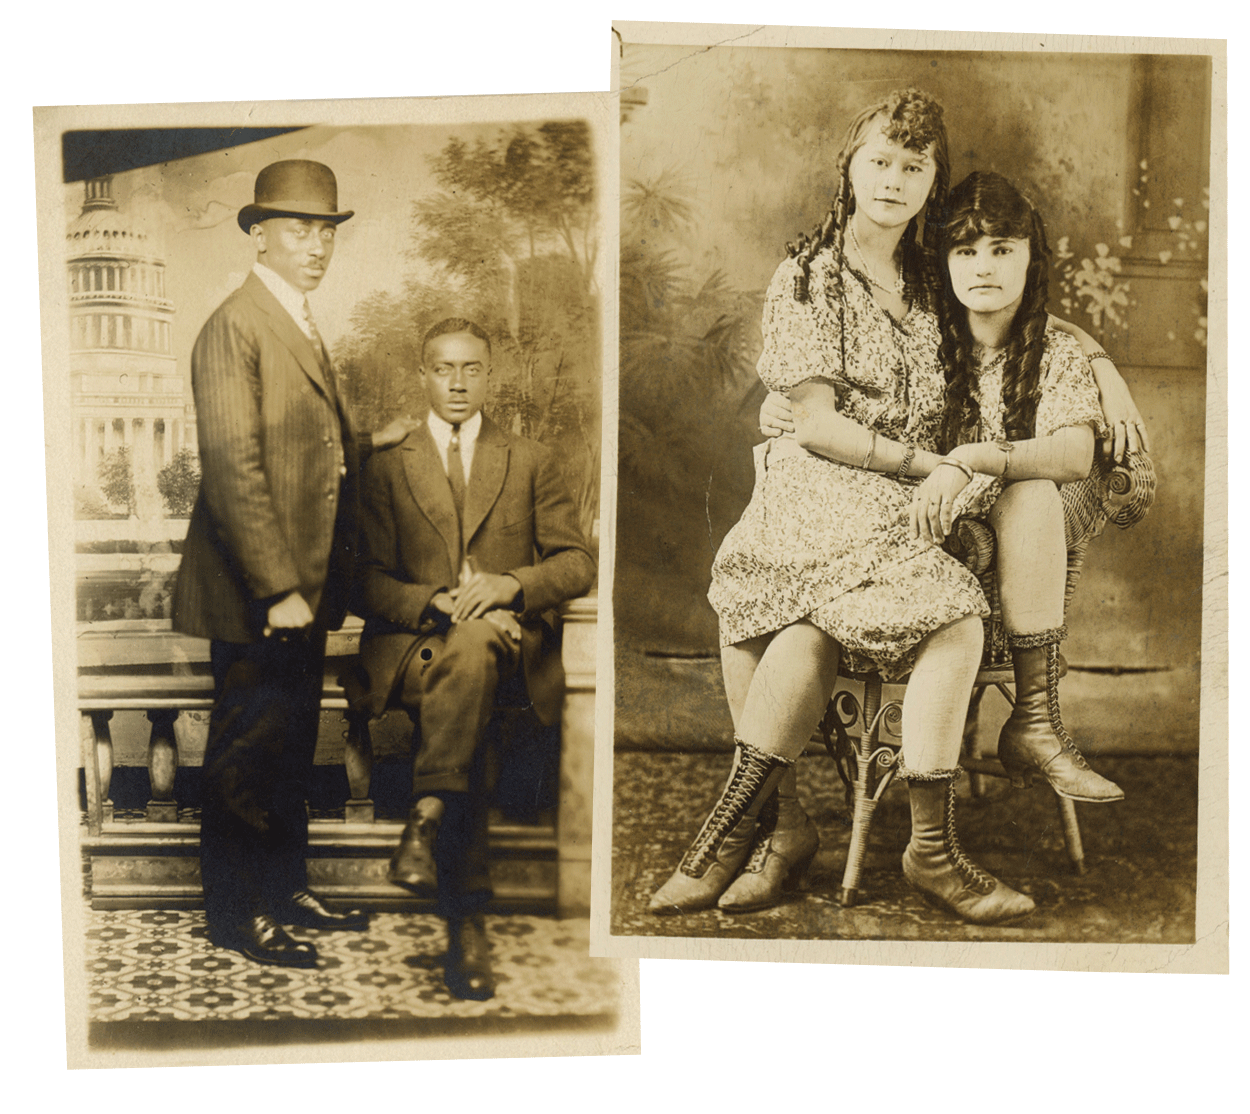 Historic postcards from the early 20th century, one of a couple of men, the other of two women